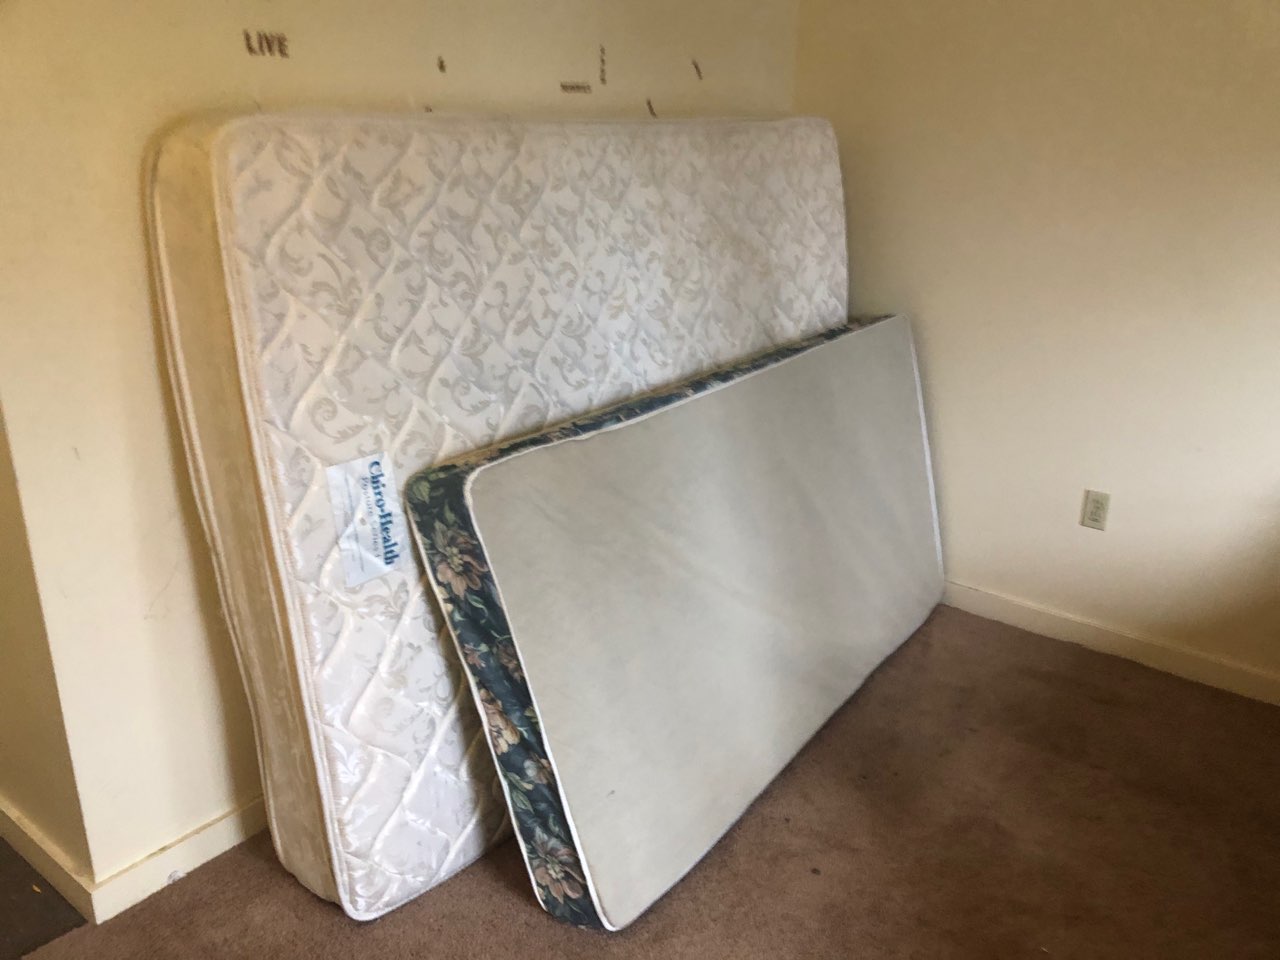 How to get rid of mattress